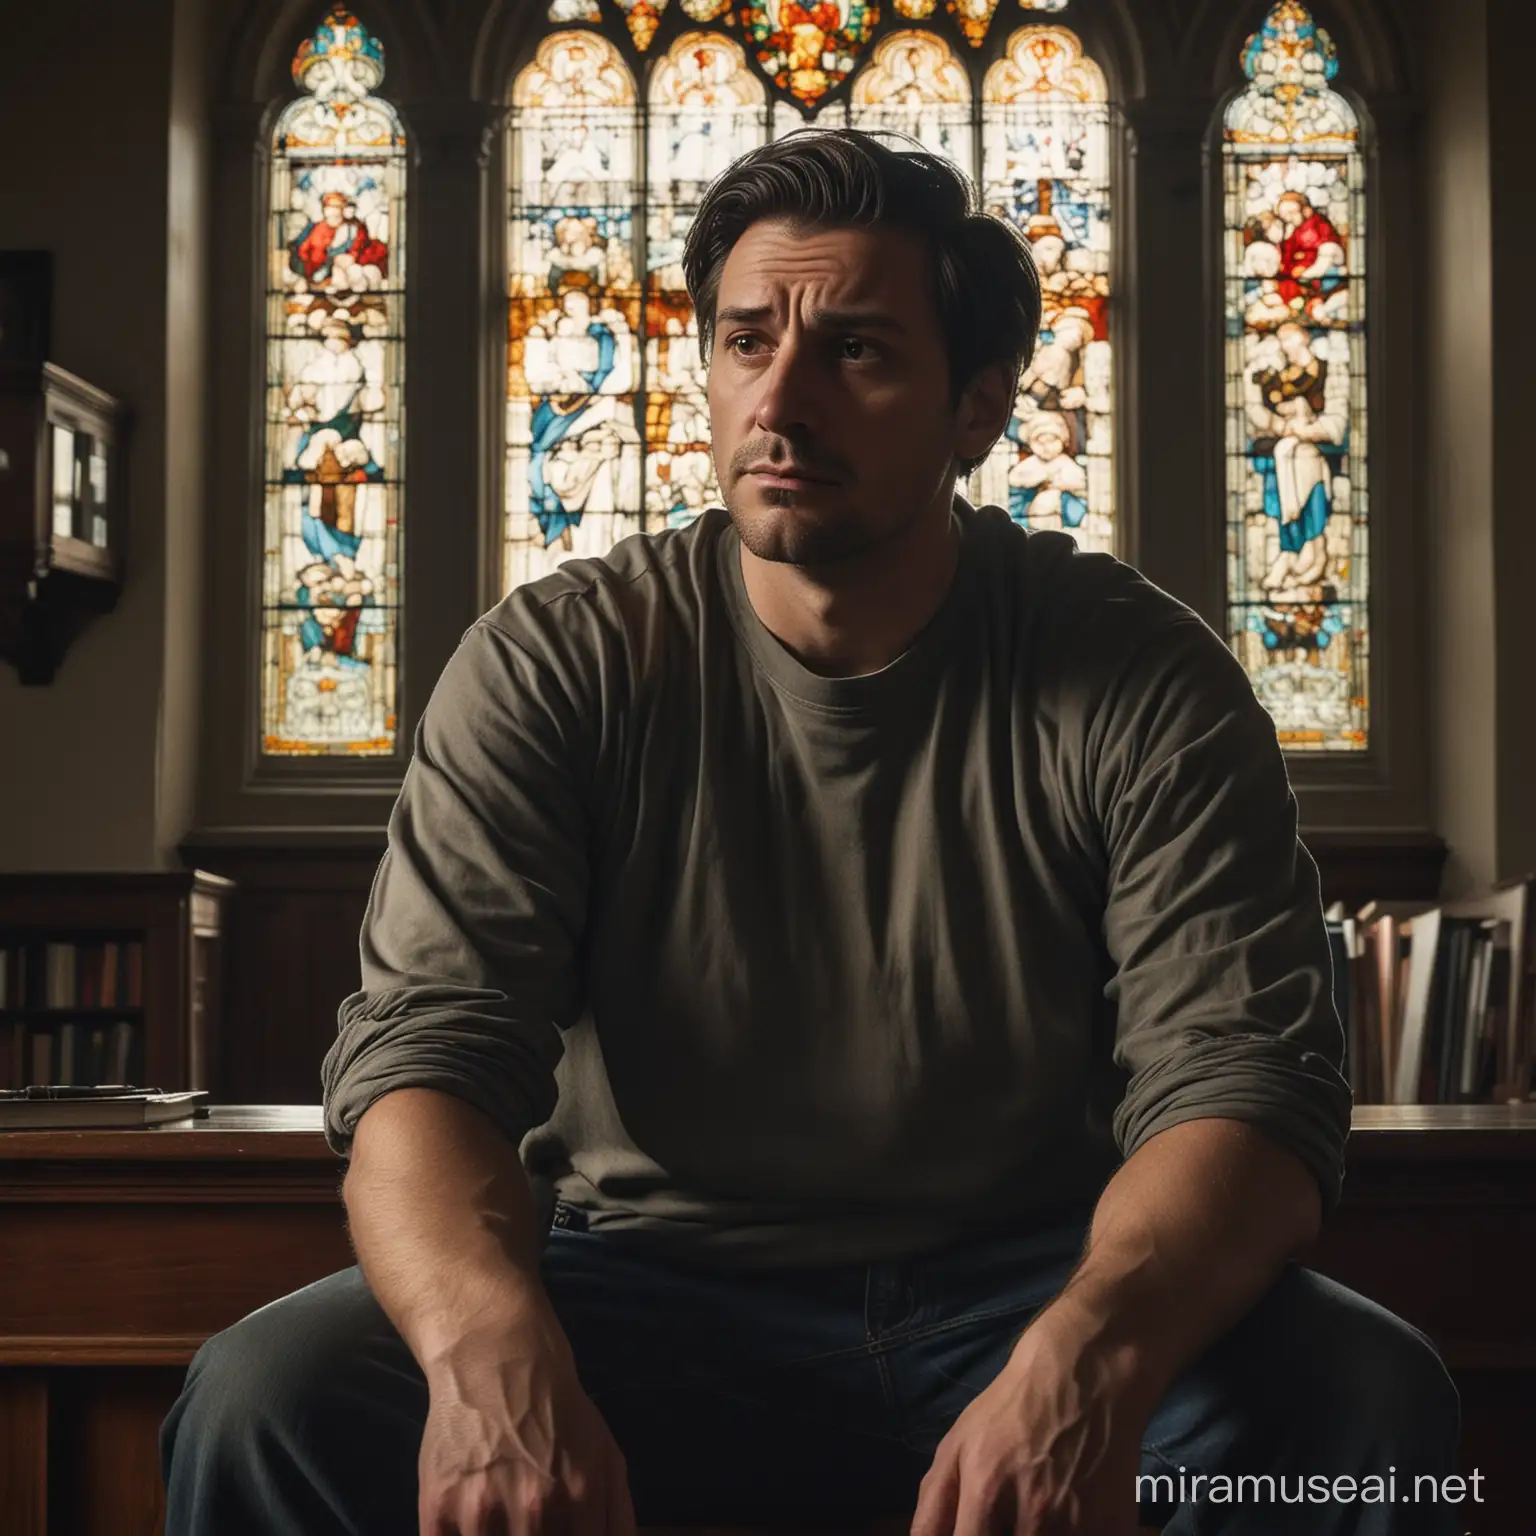 Brooding 50YearOld Man Contemplates Alone in Dimly Lit Church Library